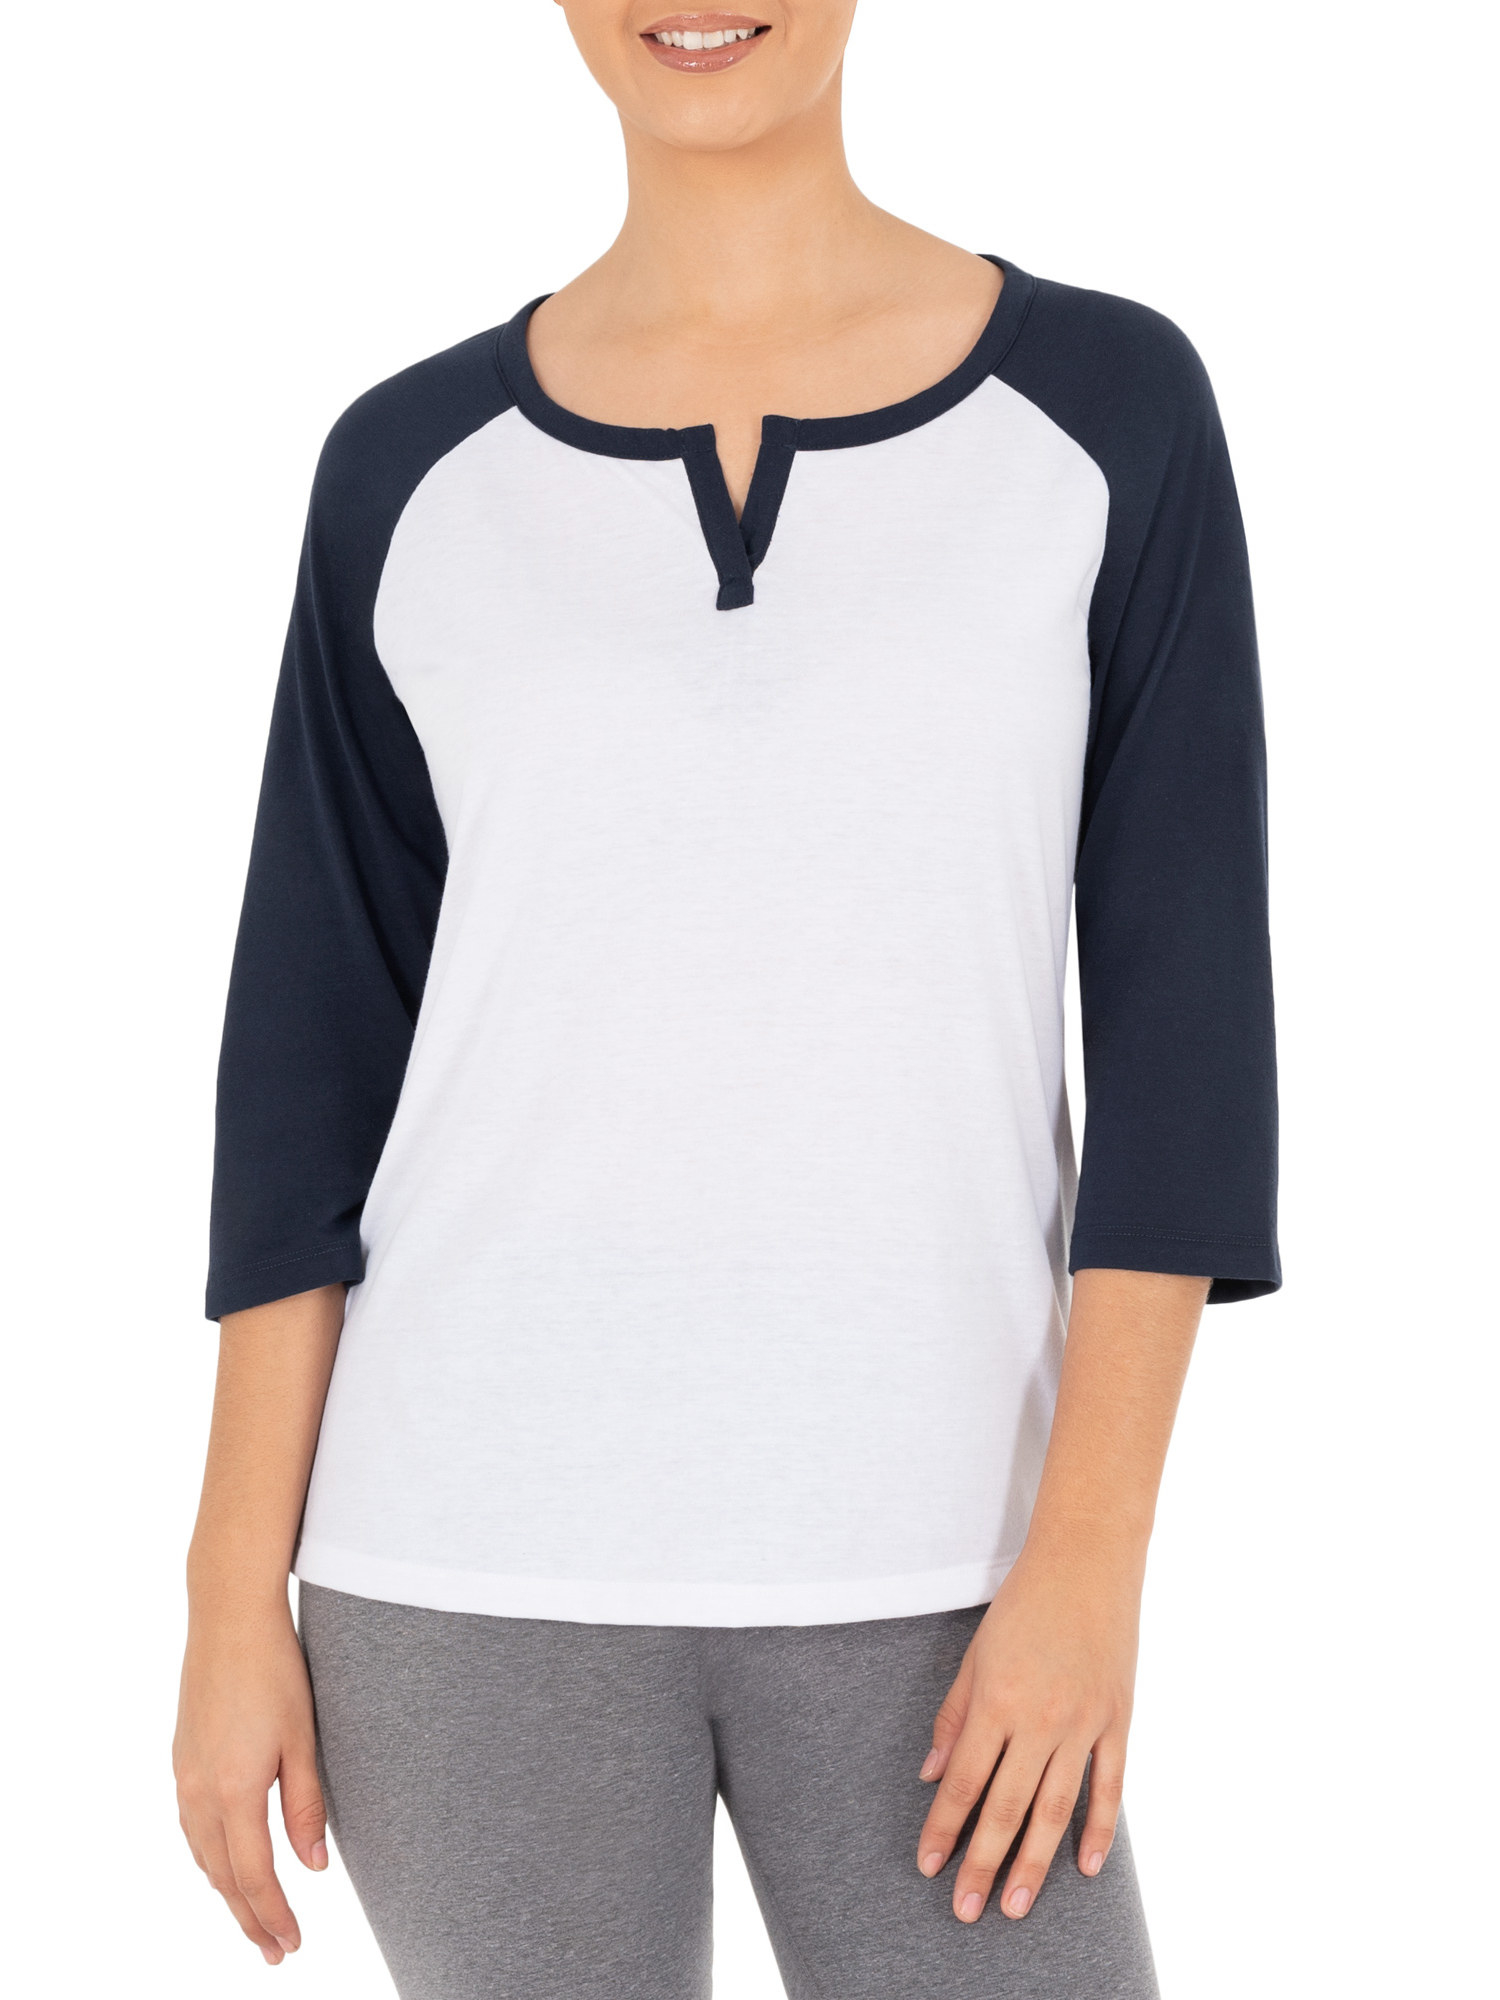 The navy and white long-sleeve T-shirt